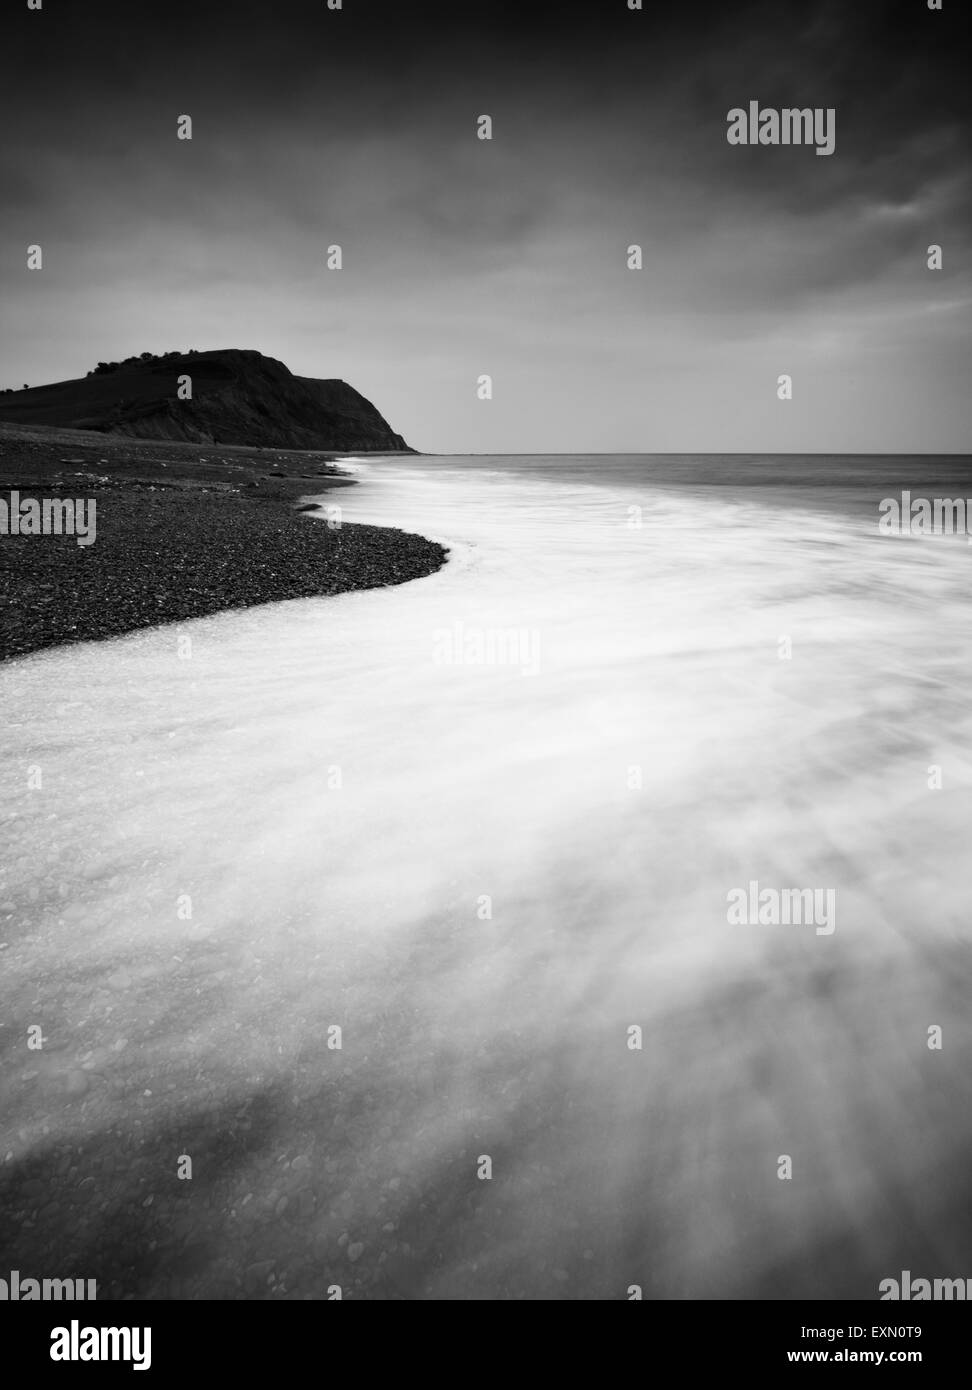 Seatown Black and White Stock Photos & Images - Alamy